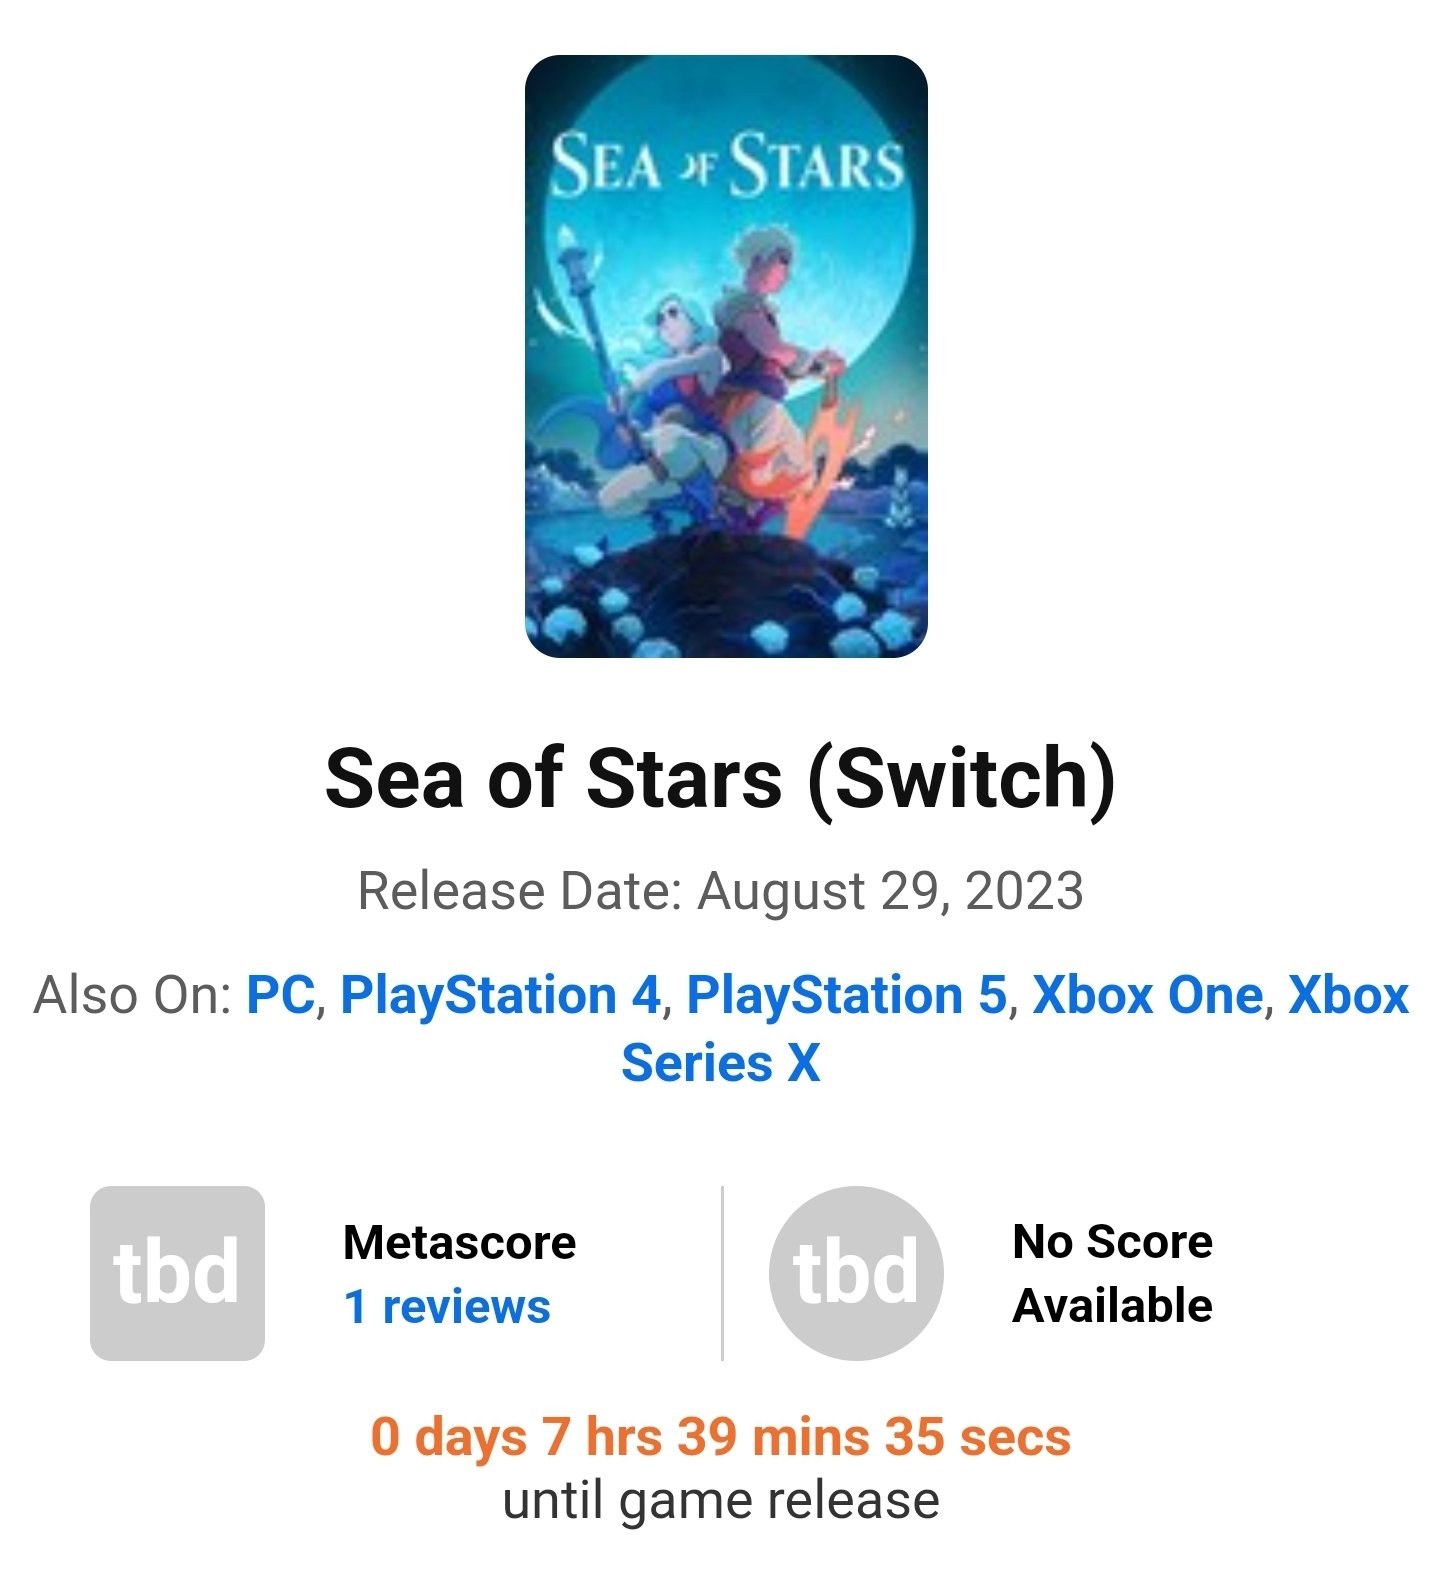 metacritic on X: Sea of Stars (Metascore Updates): [PC - 89]   [PS5 - 88]  [Switch - 91]   [XSX - 89]  The new  benchmark for turn-based RPGs - God